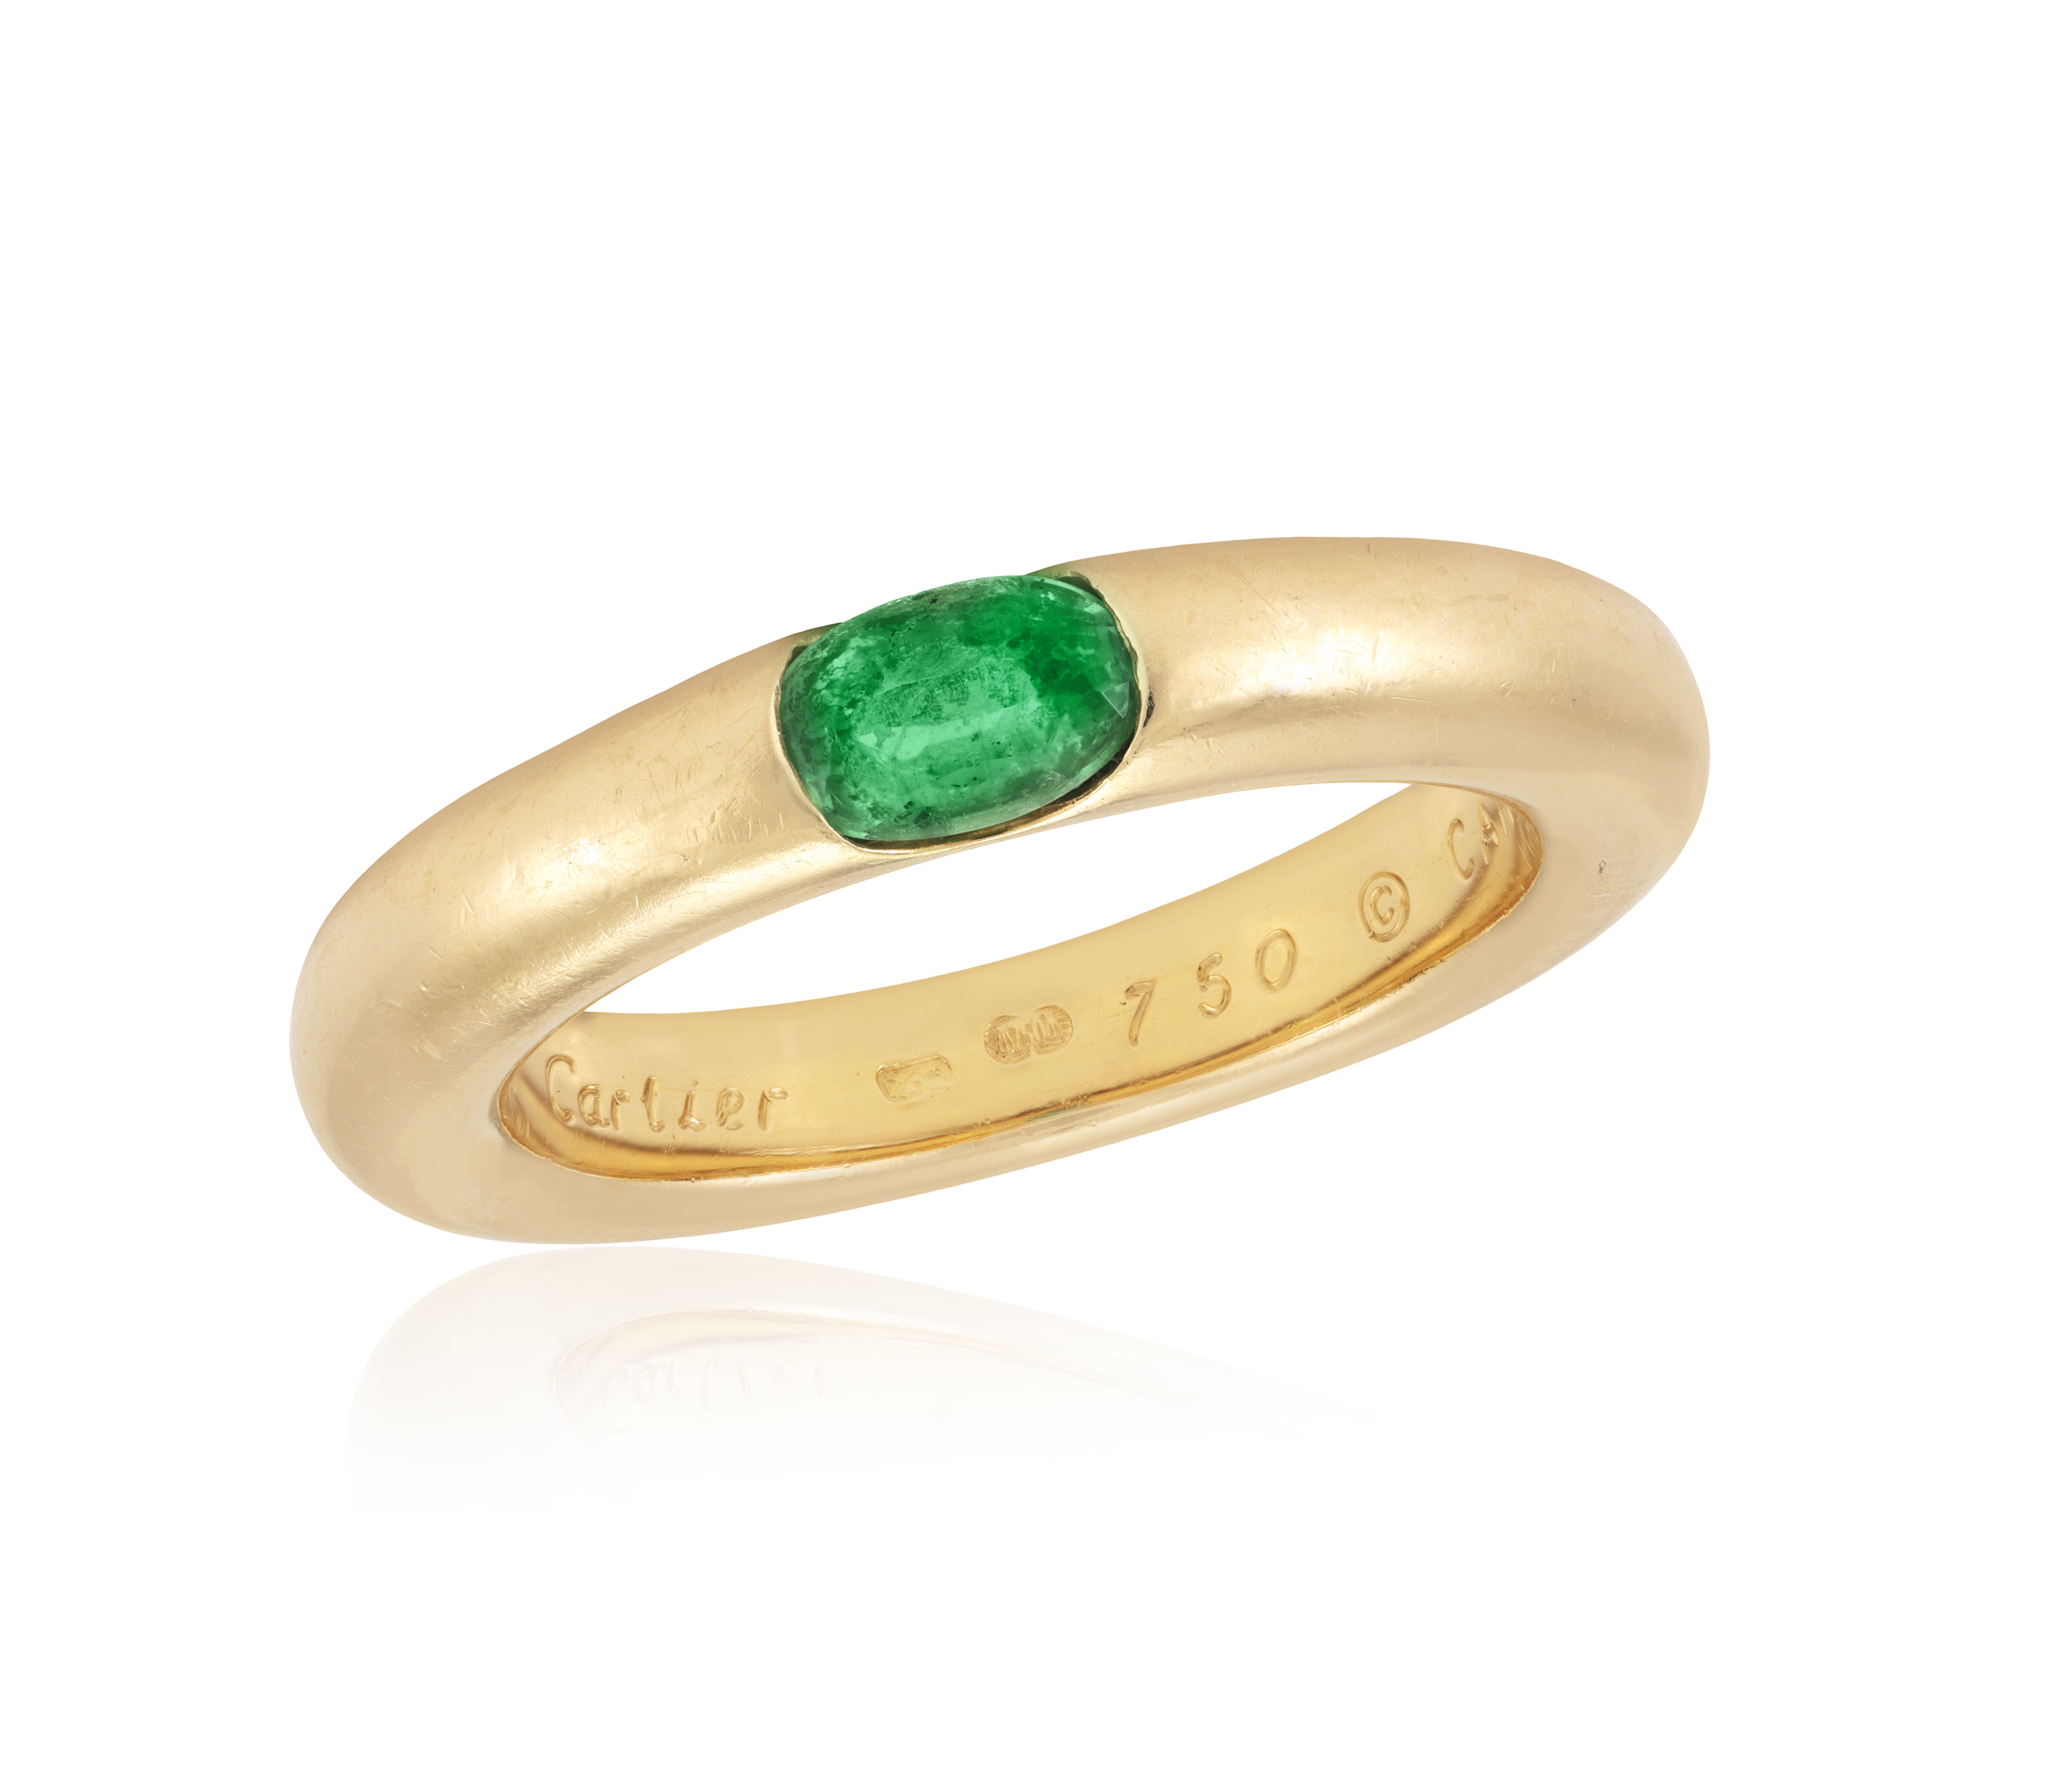 AN EMERALD 'ELLIPSE' RING, BY CARTIER, 1992 The oval-shaped emerald set to a plain hoop, mounted - Image 3 of 4